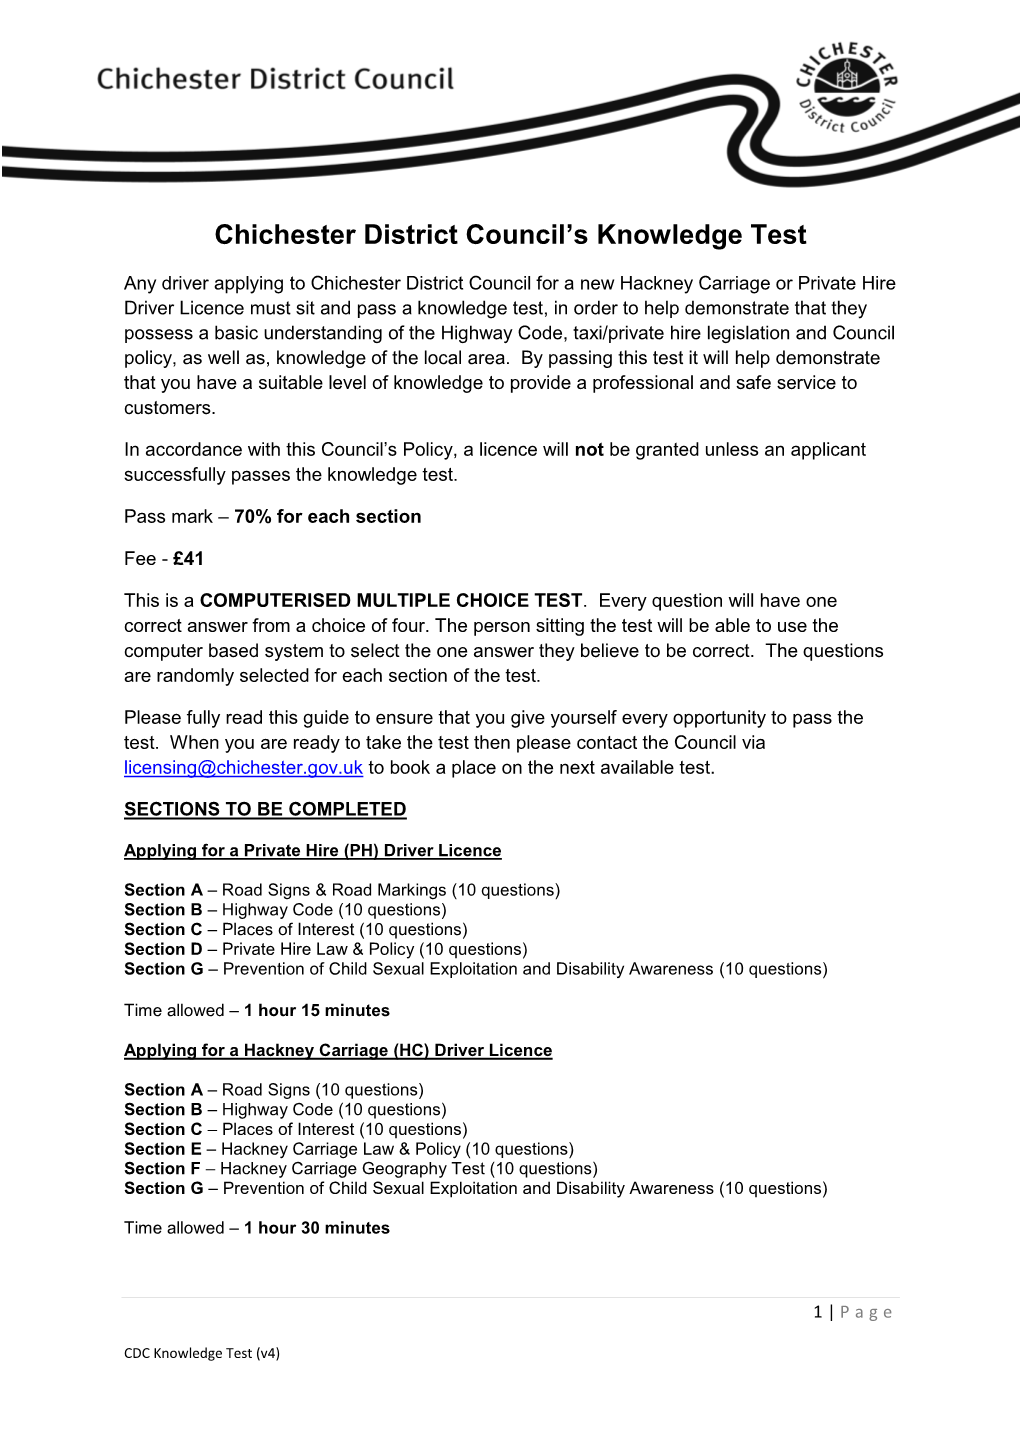 Chichester District Council's Knowledge Test